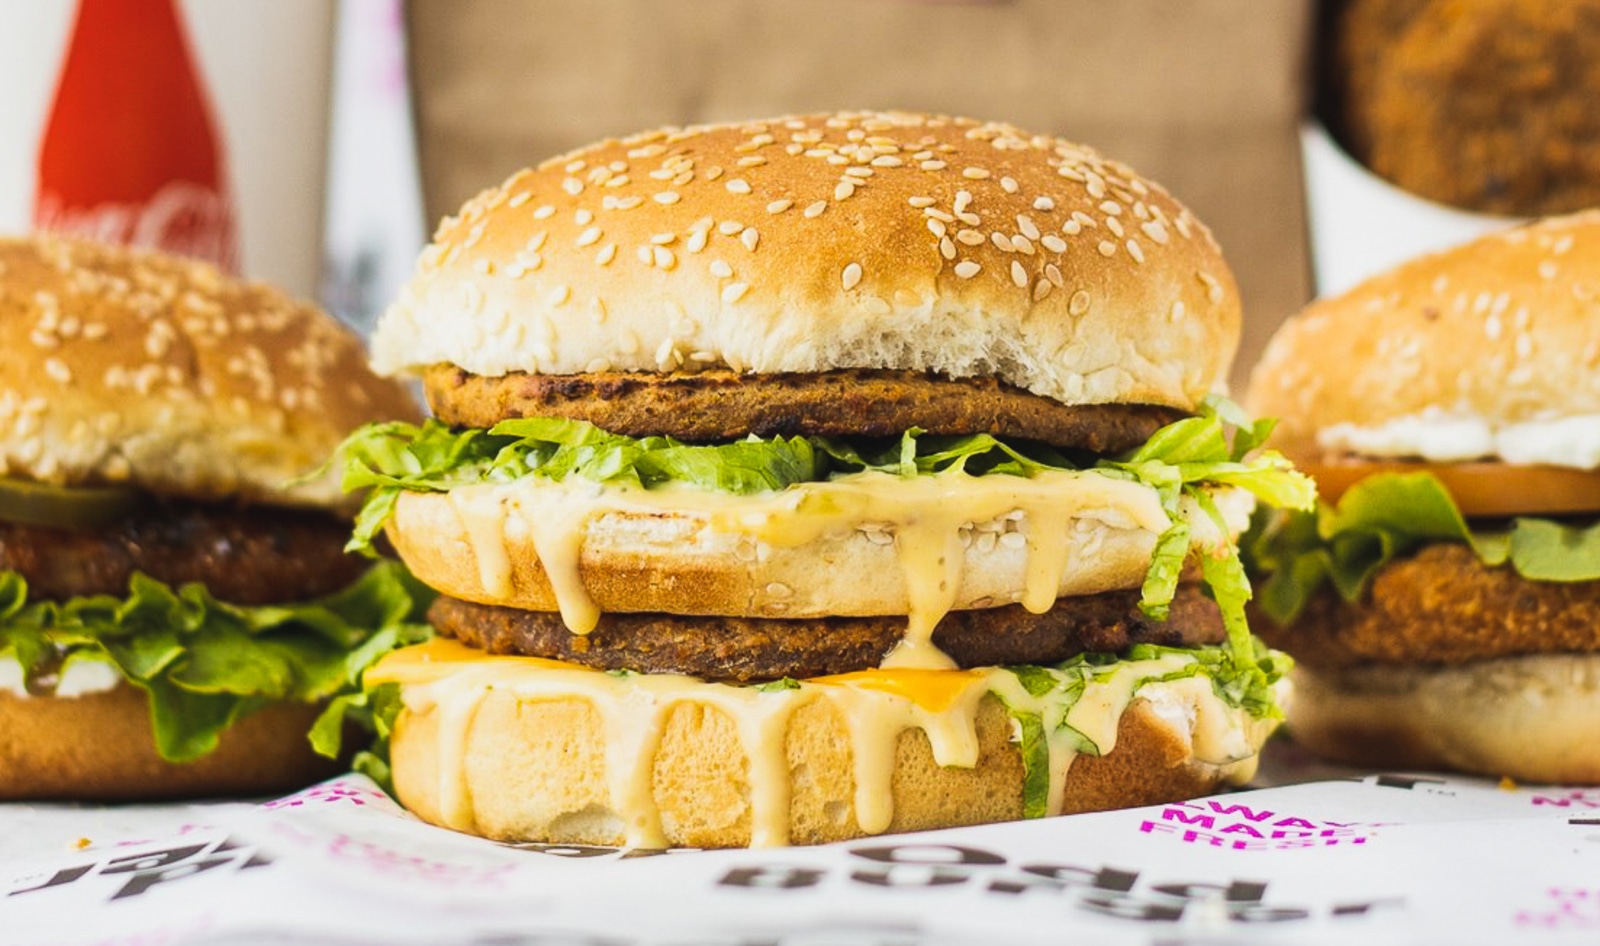 World's First Publicly Traded Vegan Fast-Food Chain Is Expanding to Nearly 50 Locations&nbsp;